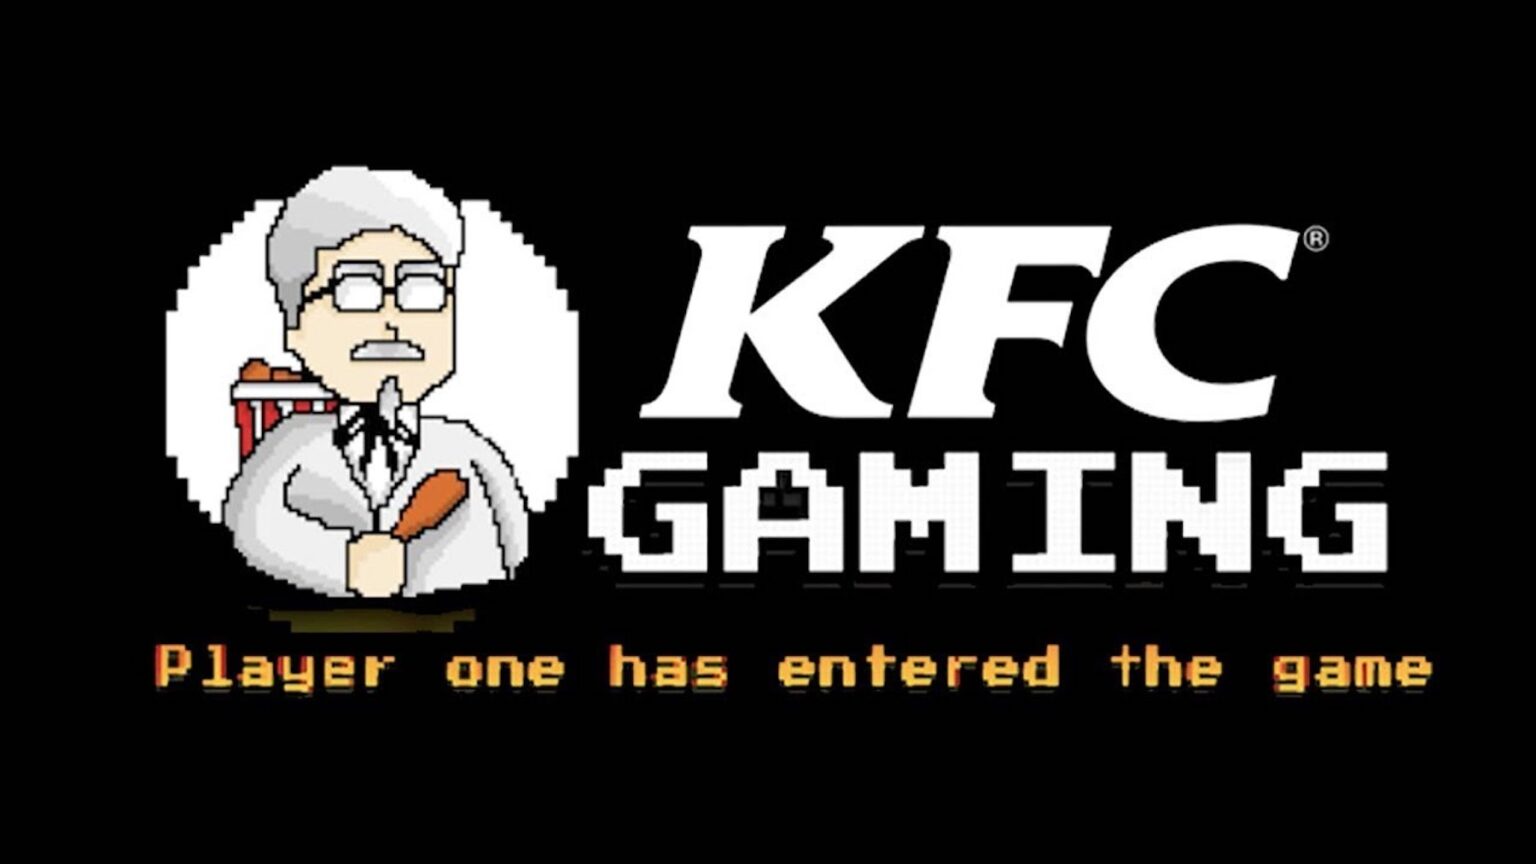 Time to dive into the world of baffled internet rage with KFC gaming! Dive right in to see the mixed response that Twitter is giving this account.